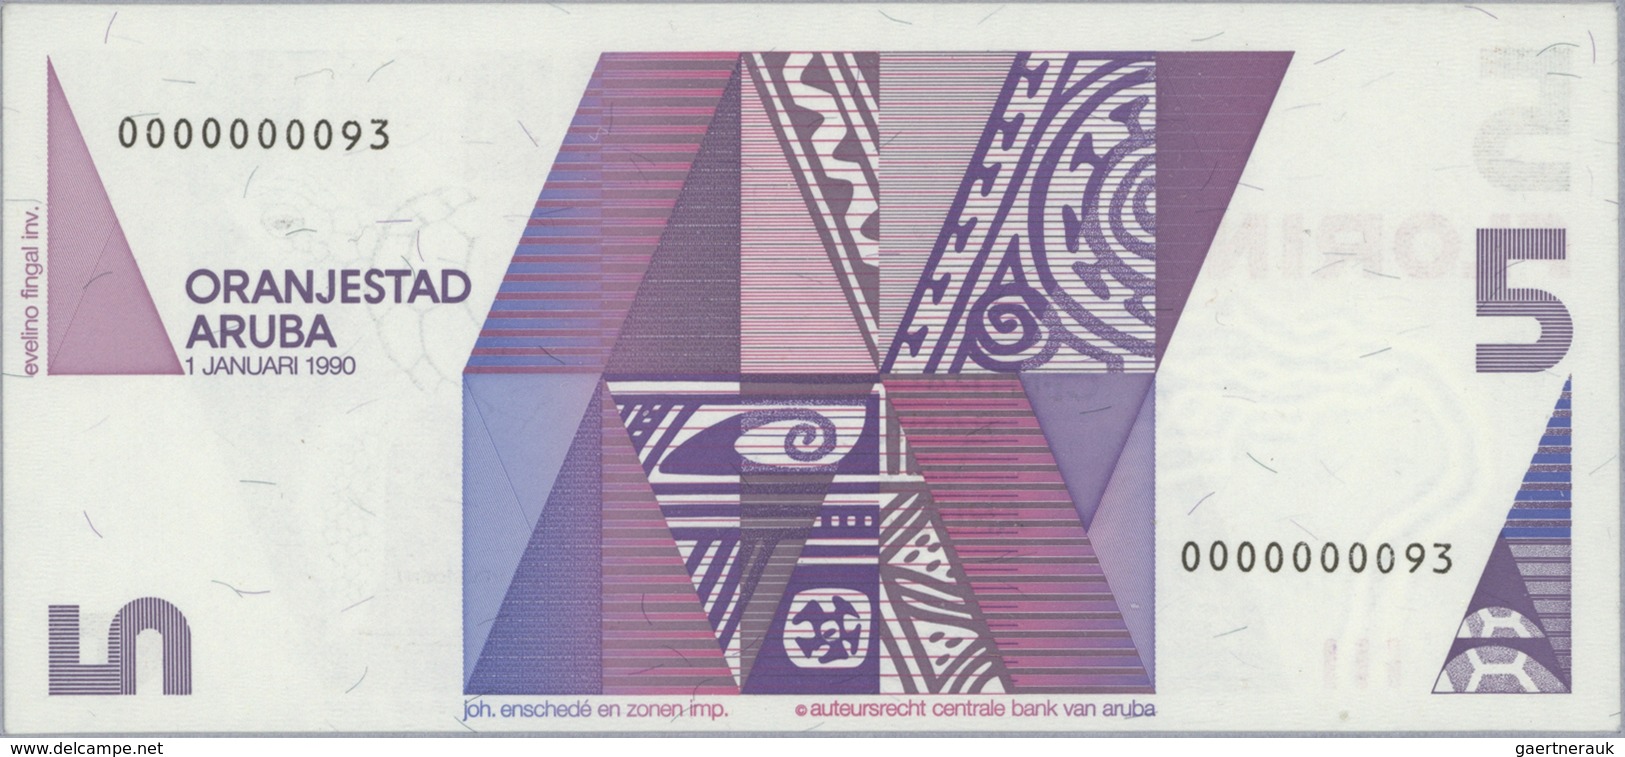 01026 Aruba: Official Collectors Book Issued By The Central Bank Of Aruba Commemorating The First Banknote - Aruba (1986-...)